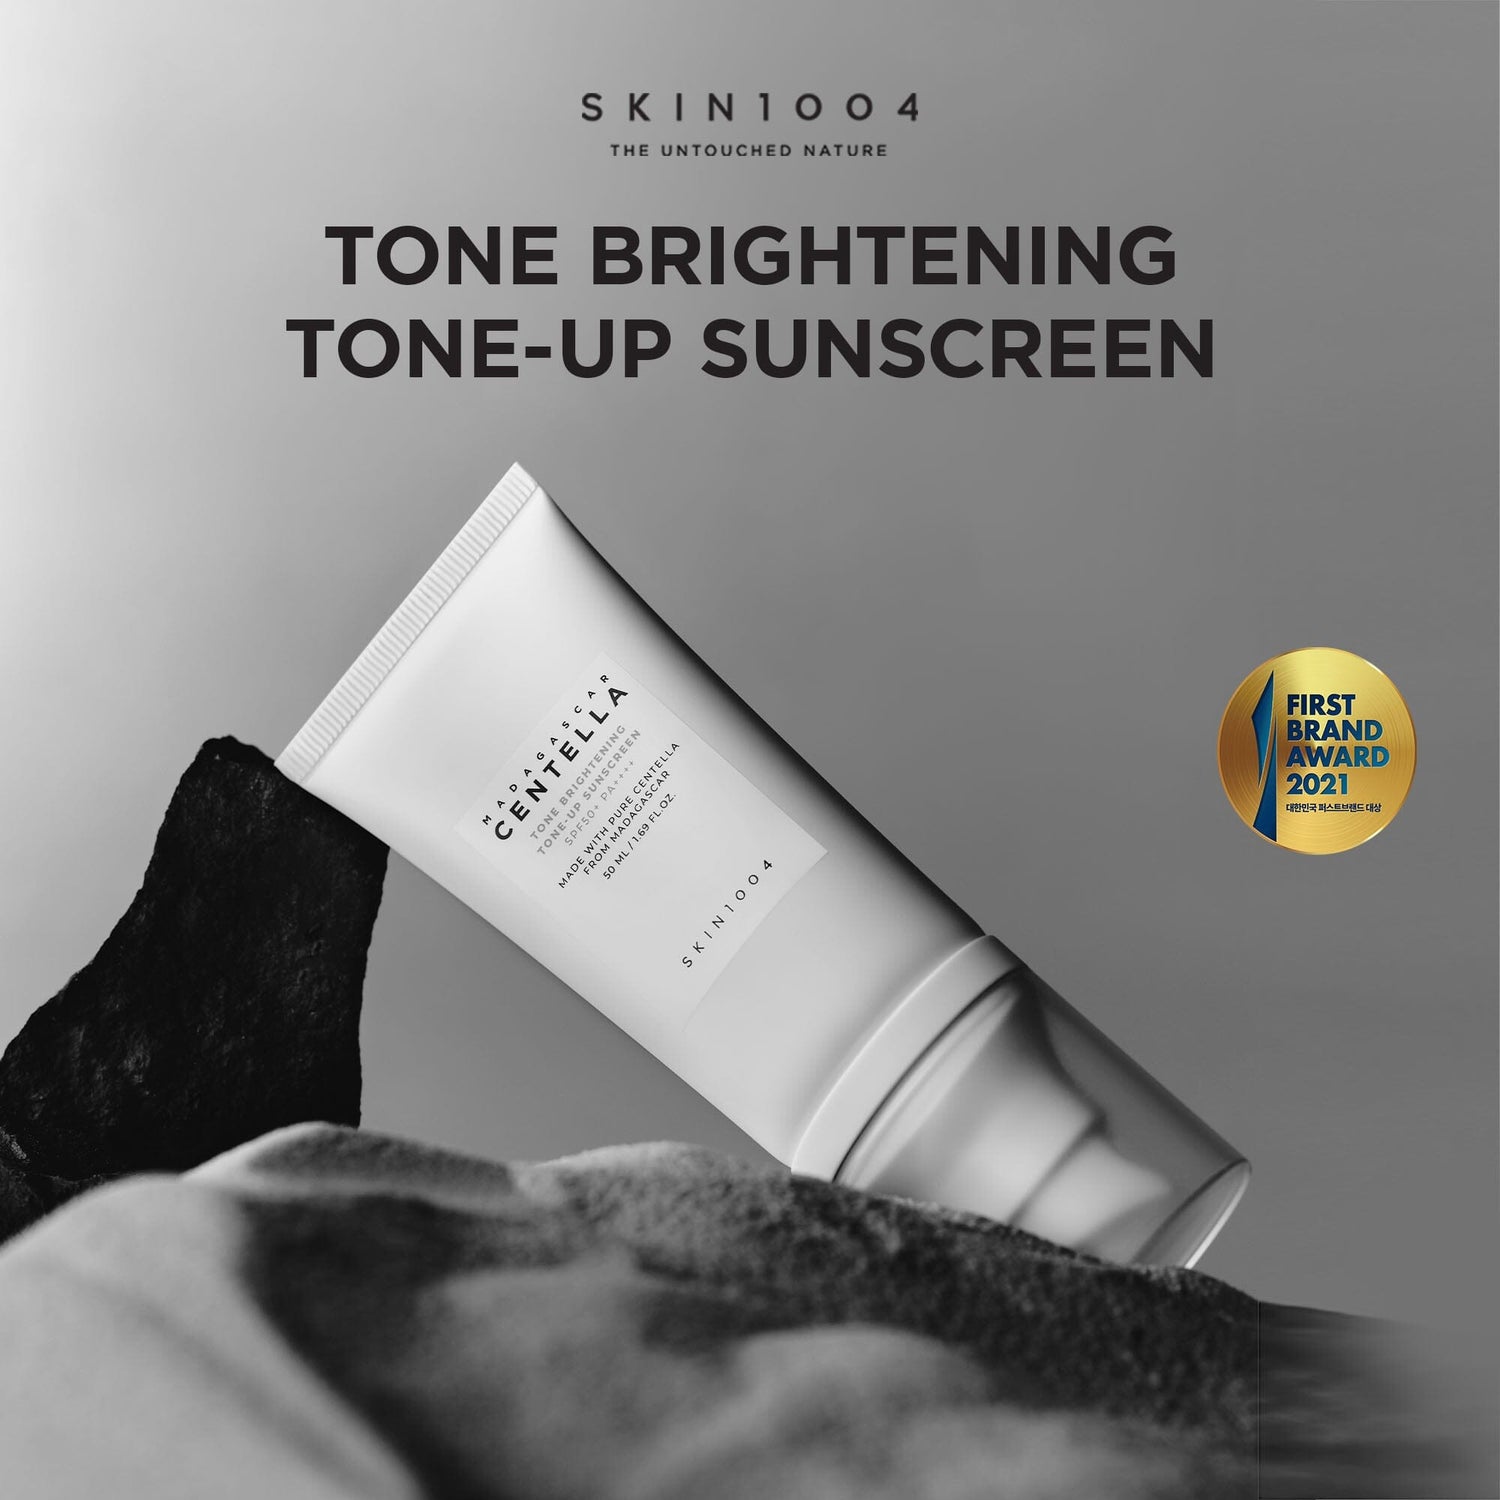 SKIN1004 Madagascar Centella Tone Brightening Tone-up Sunscreen SPF50+ PA++++ 50ml, at Orion Beauty. SKIN1004 Official Sole Authorized Retailer in Sri Lanka!